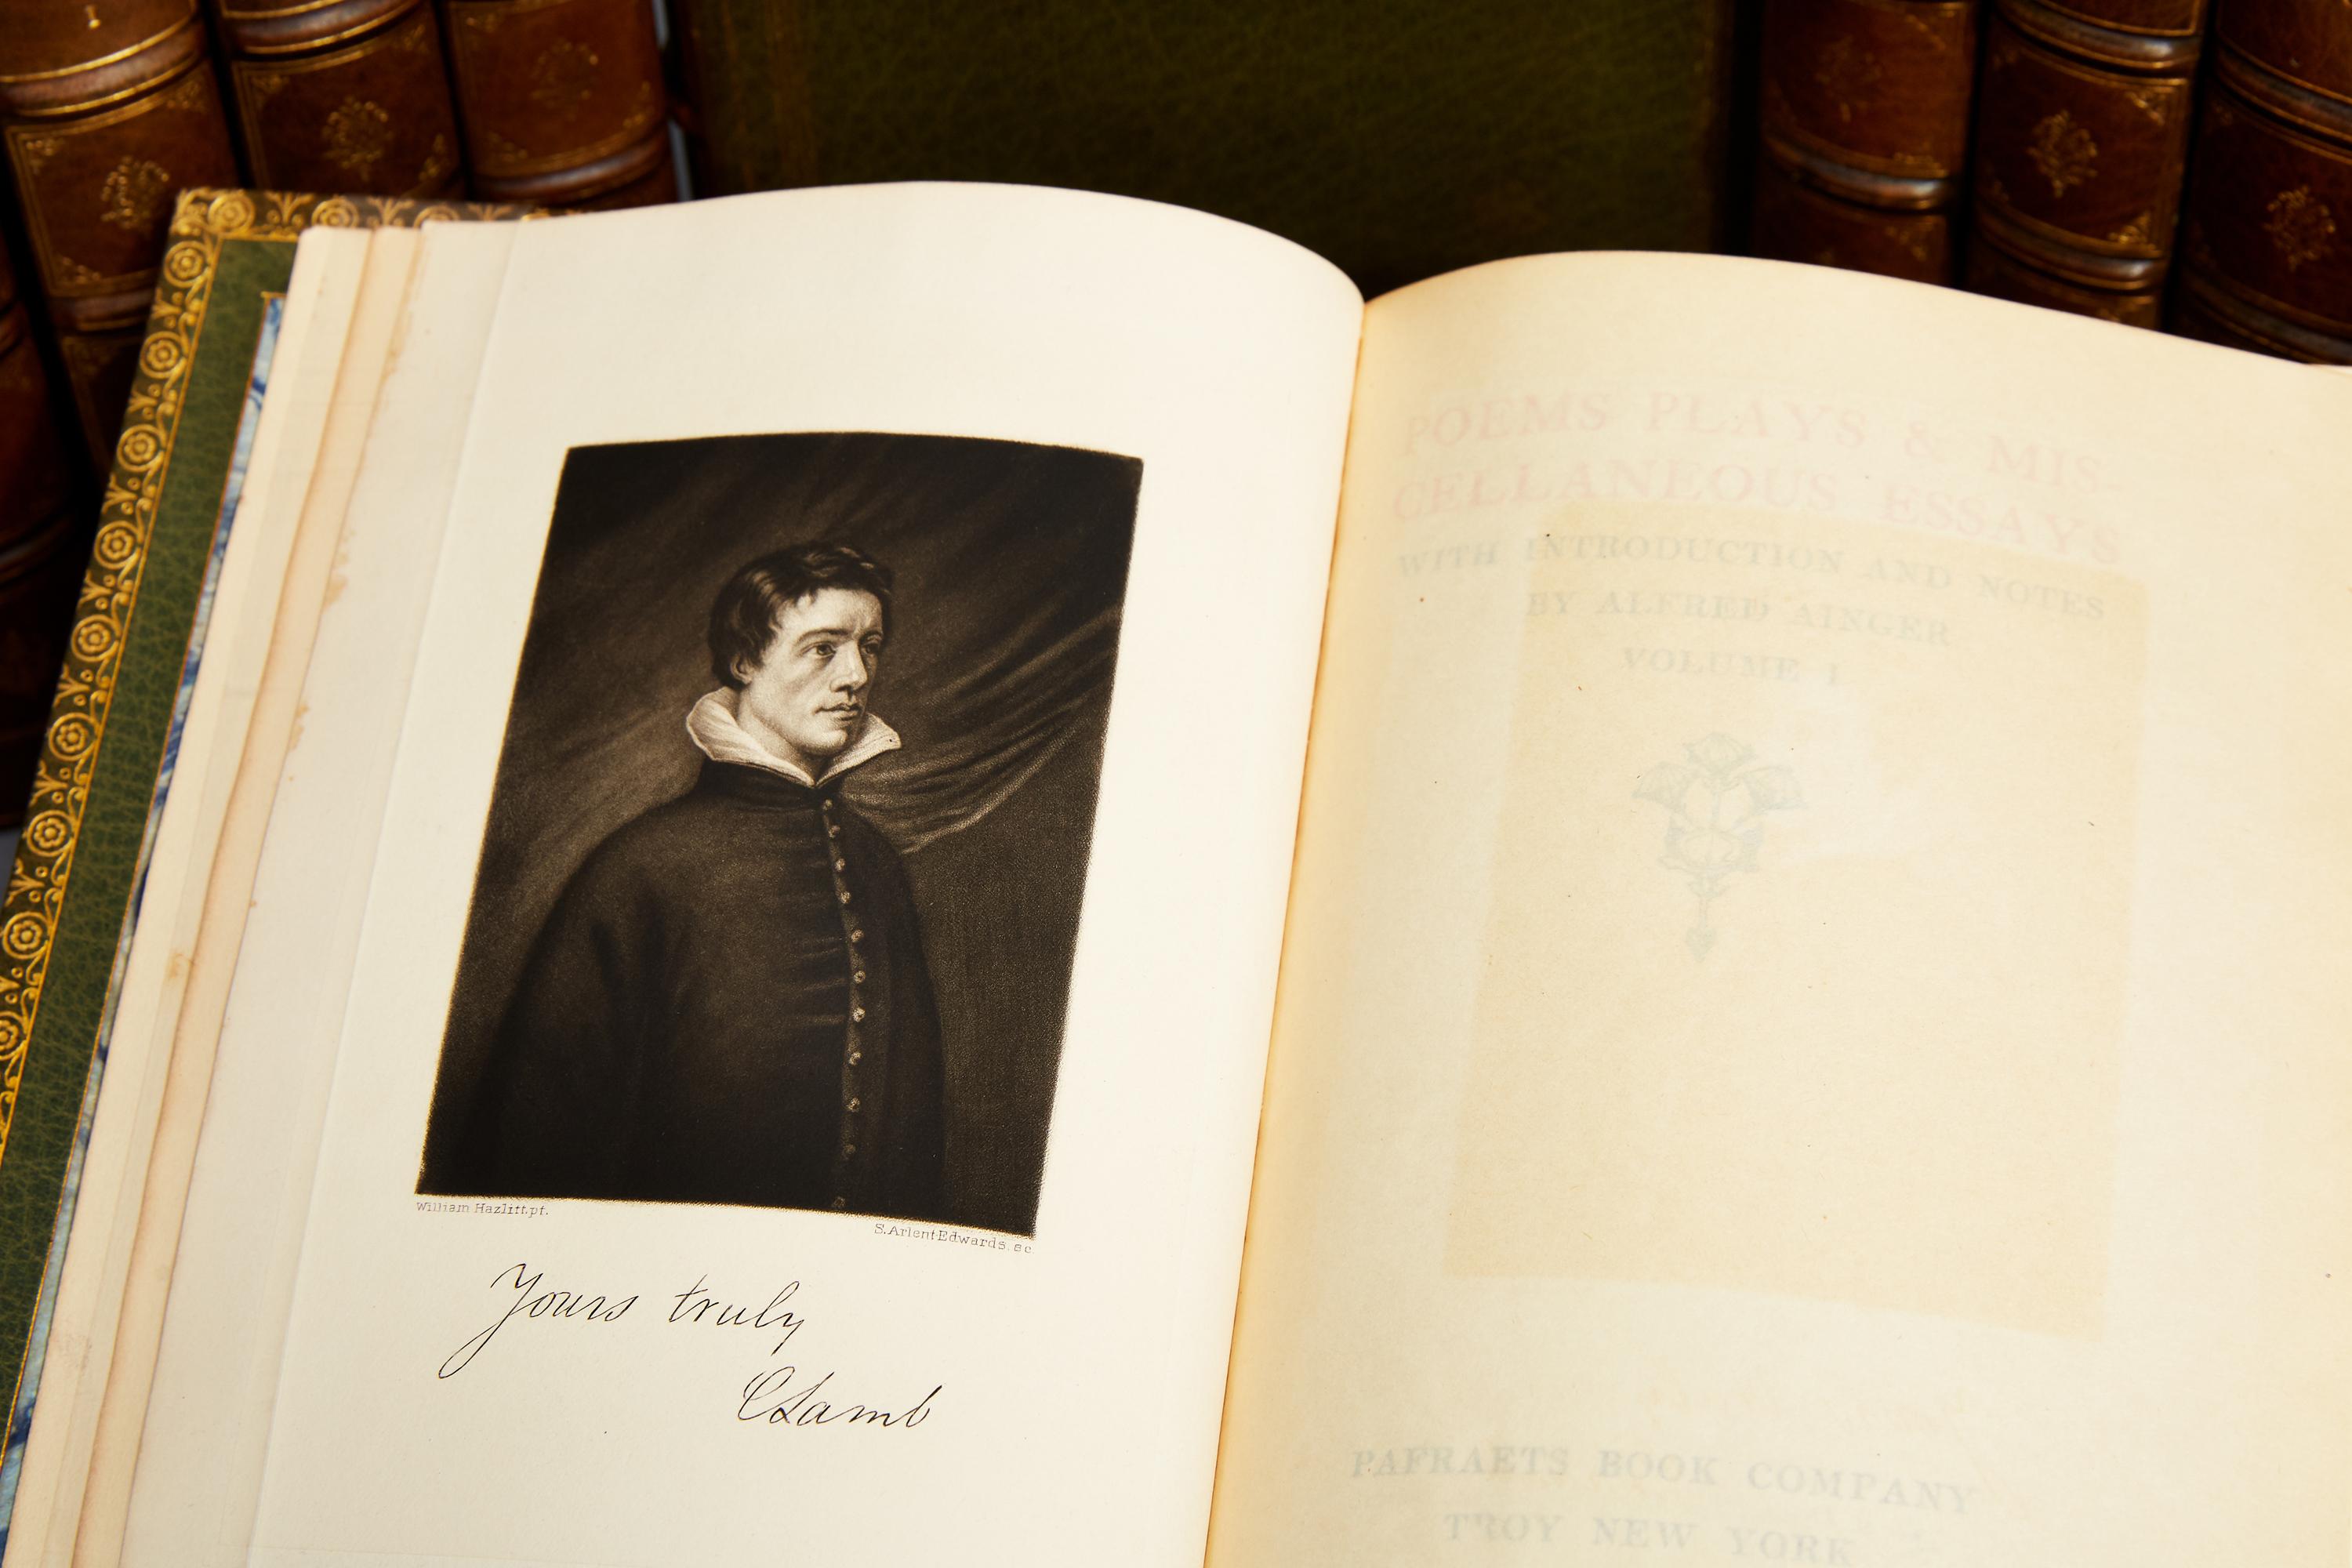 Leather Charles Lamb, The Life and Works